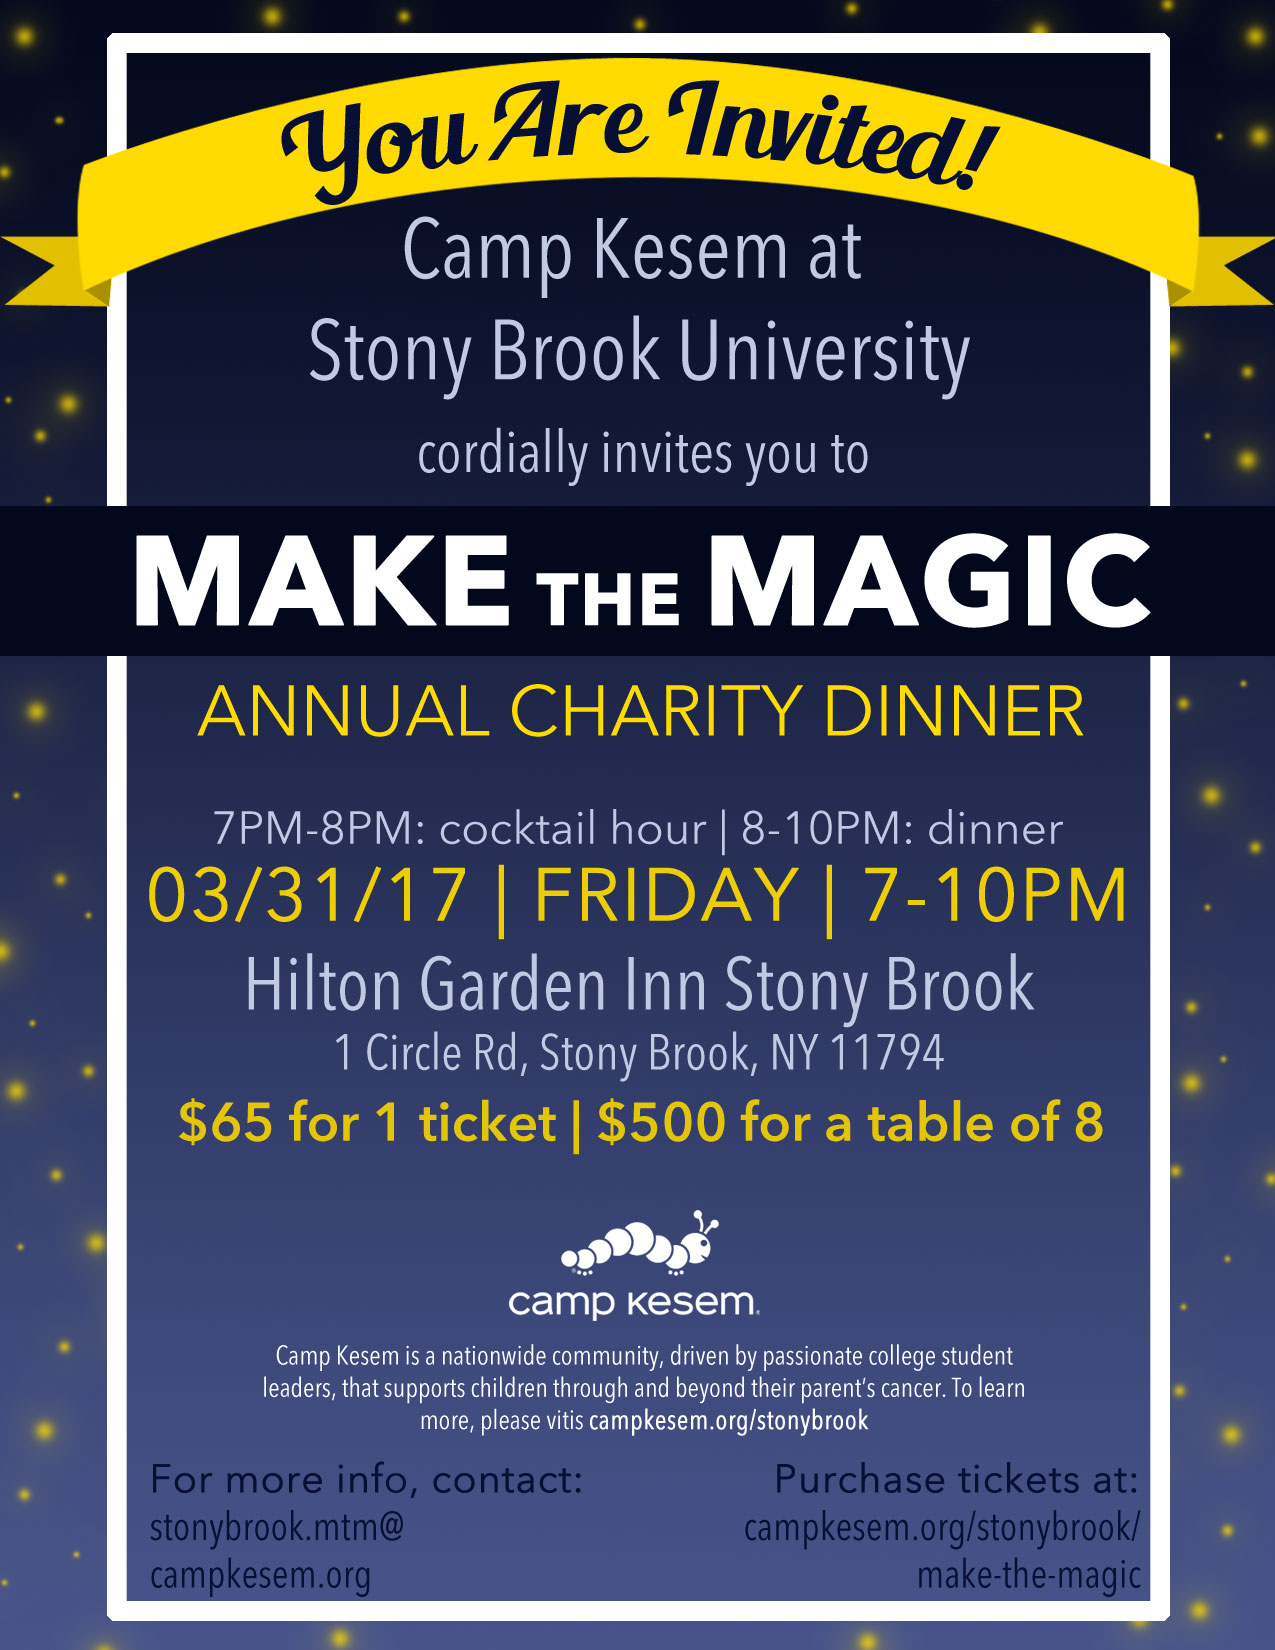 Camp Kesem at Stony Brook University cordially invites you to Make the Magic Annual Charity Dinner